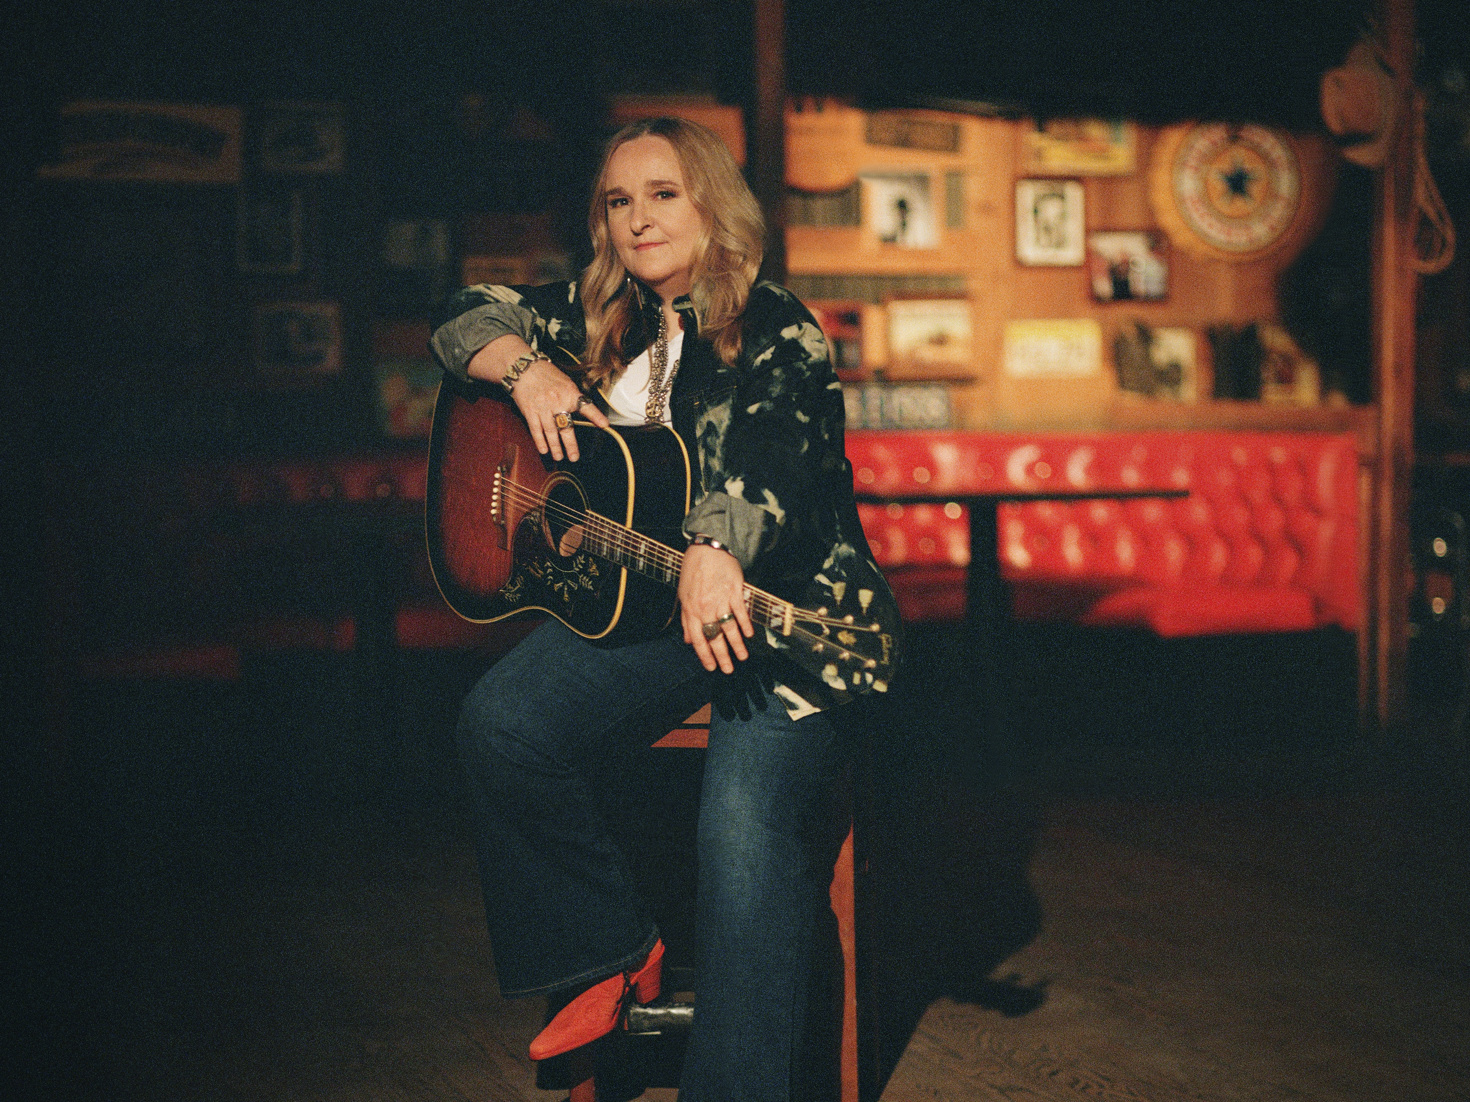 Melissa Etheridge to bring solo show to Broadway